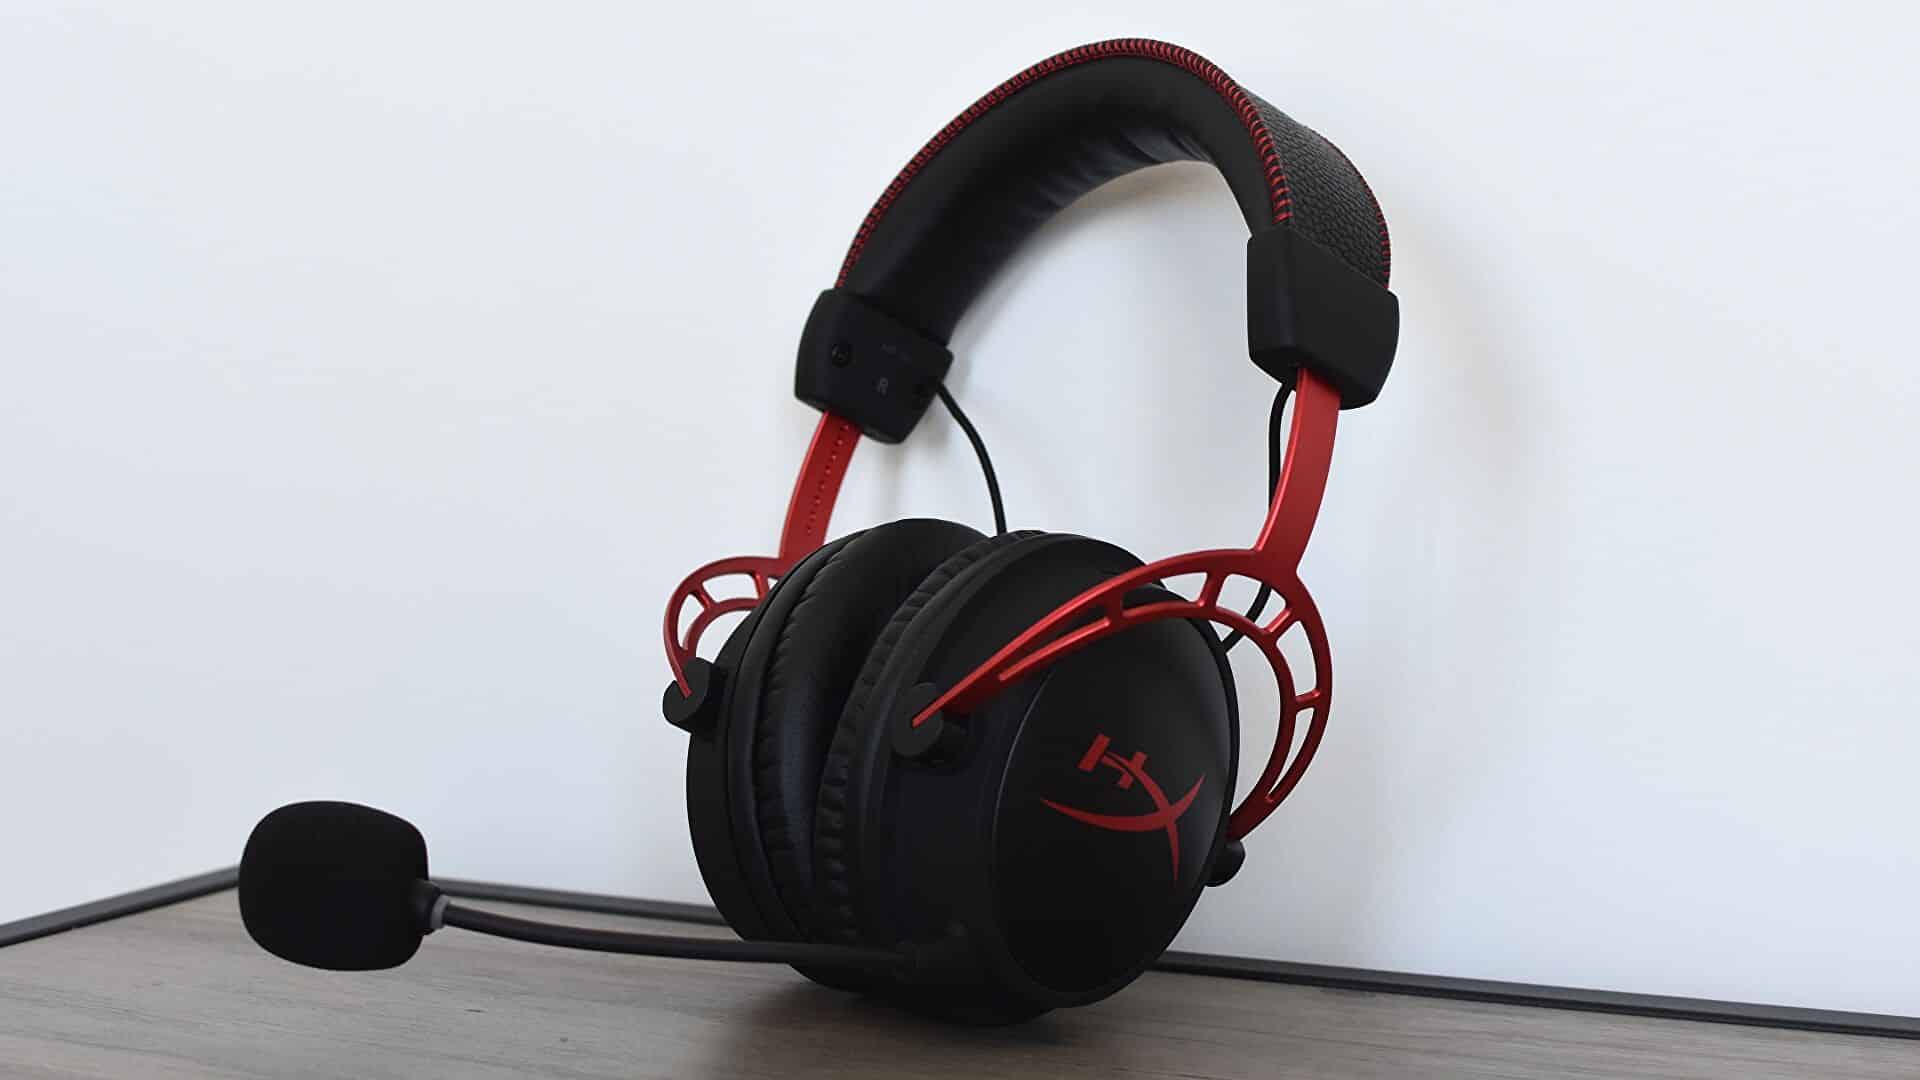 Two of the best HyperX gaming headsets are on sale this Prime Day